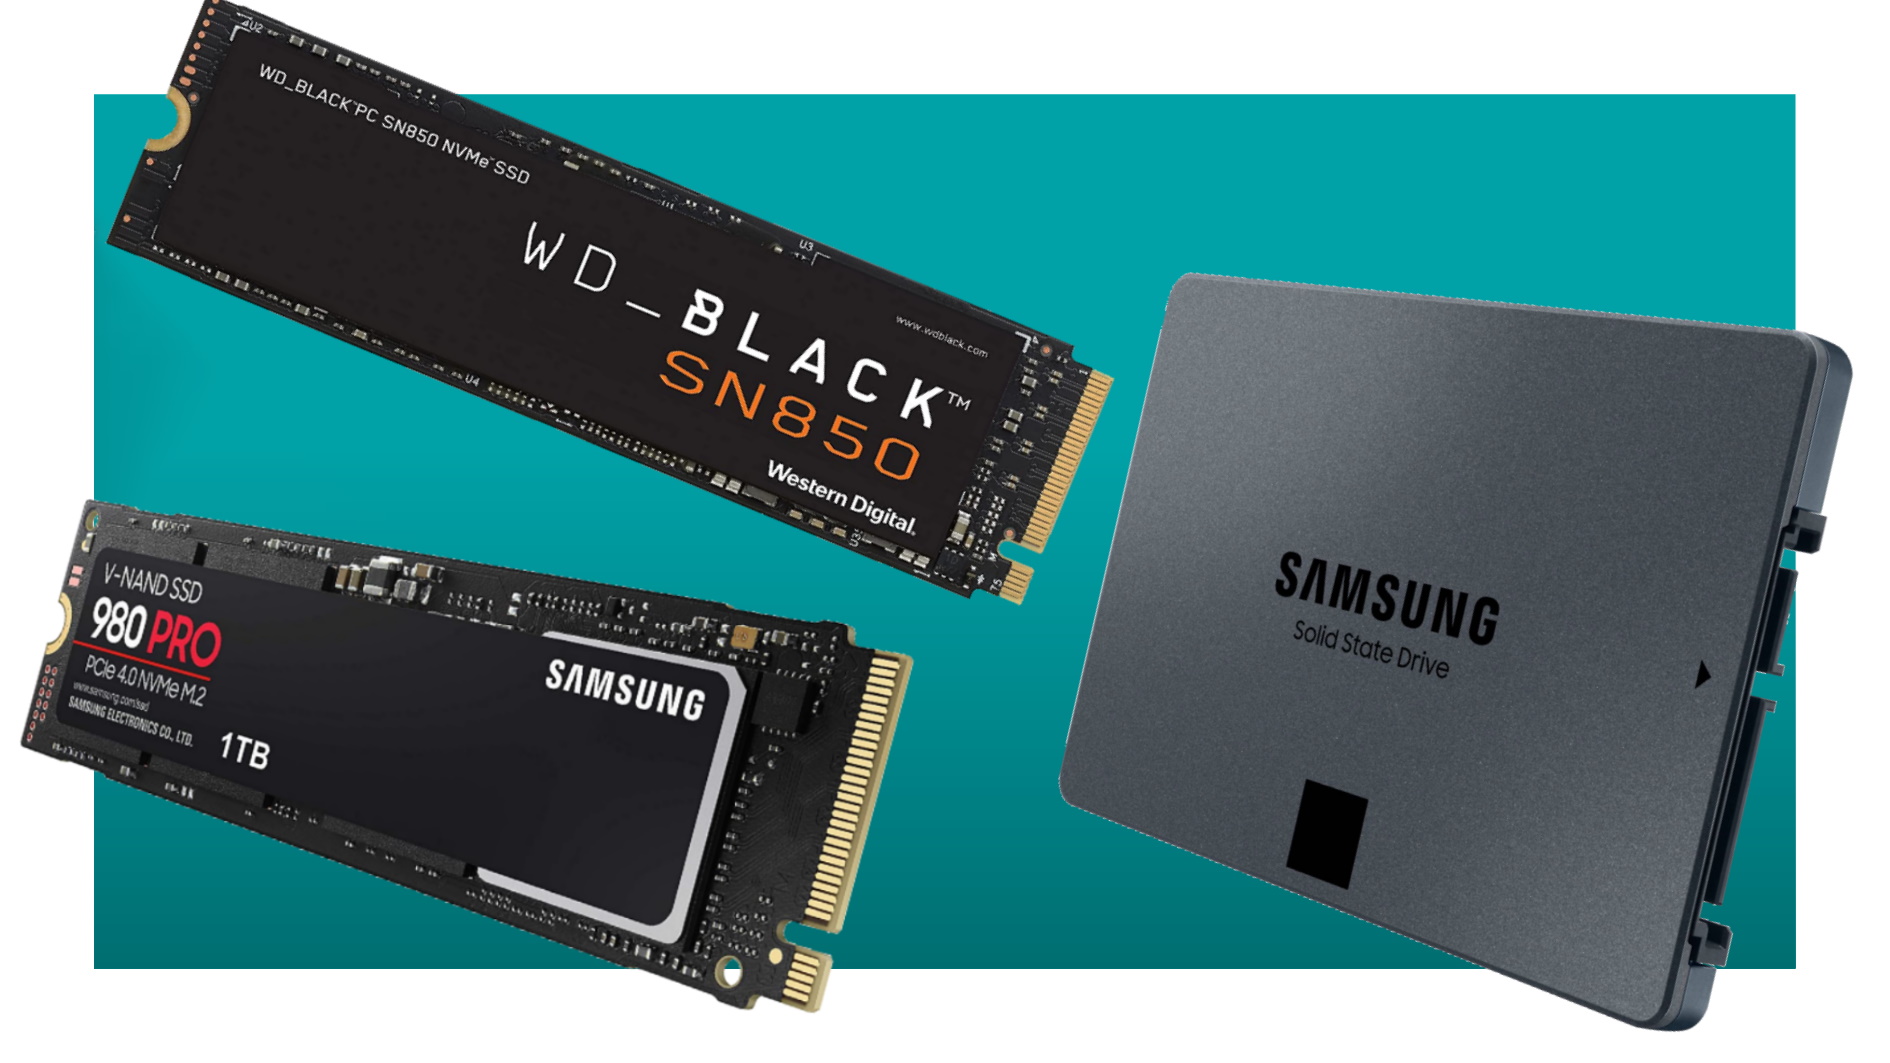  Best gaming SSD deals heading into the holidays 